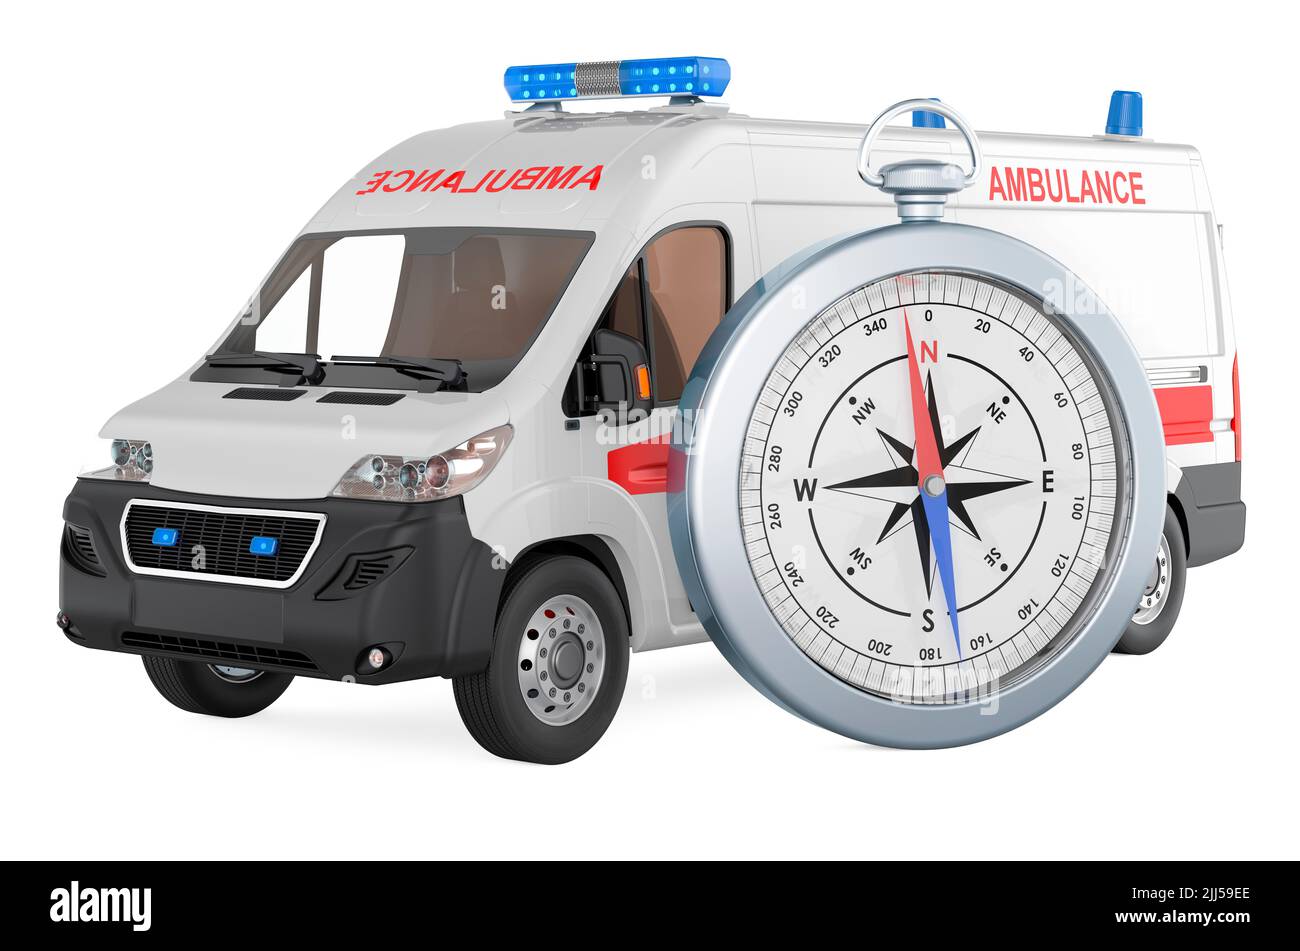 Ambulance van with compass, 3D rendering isolated on white background Stock Photo